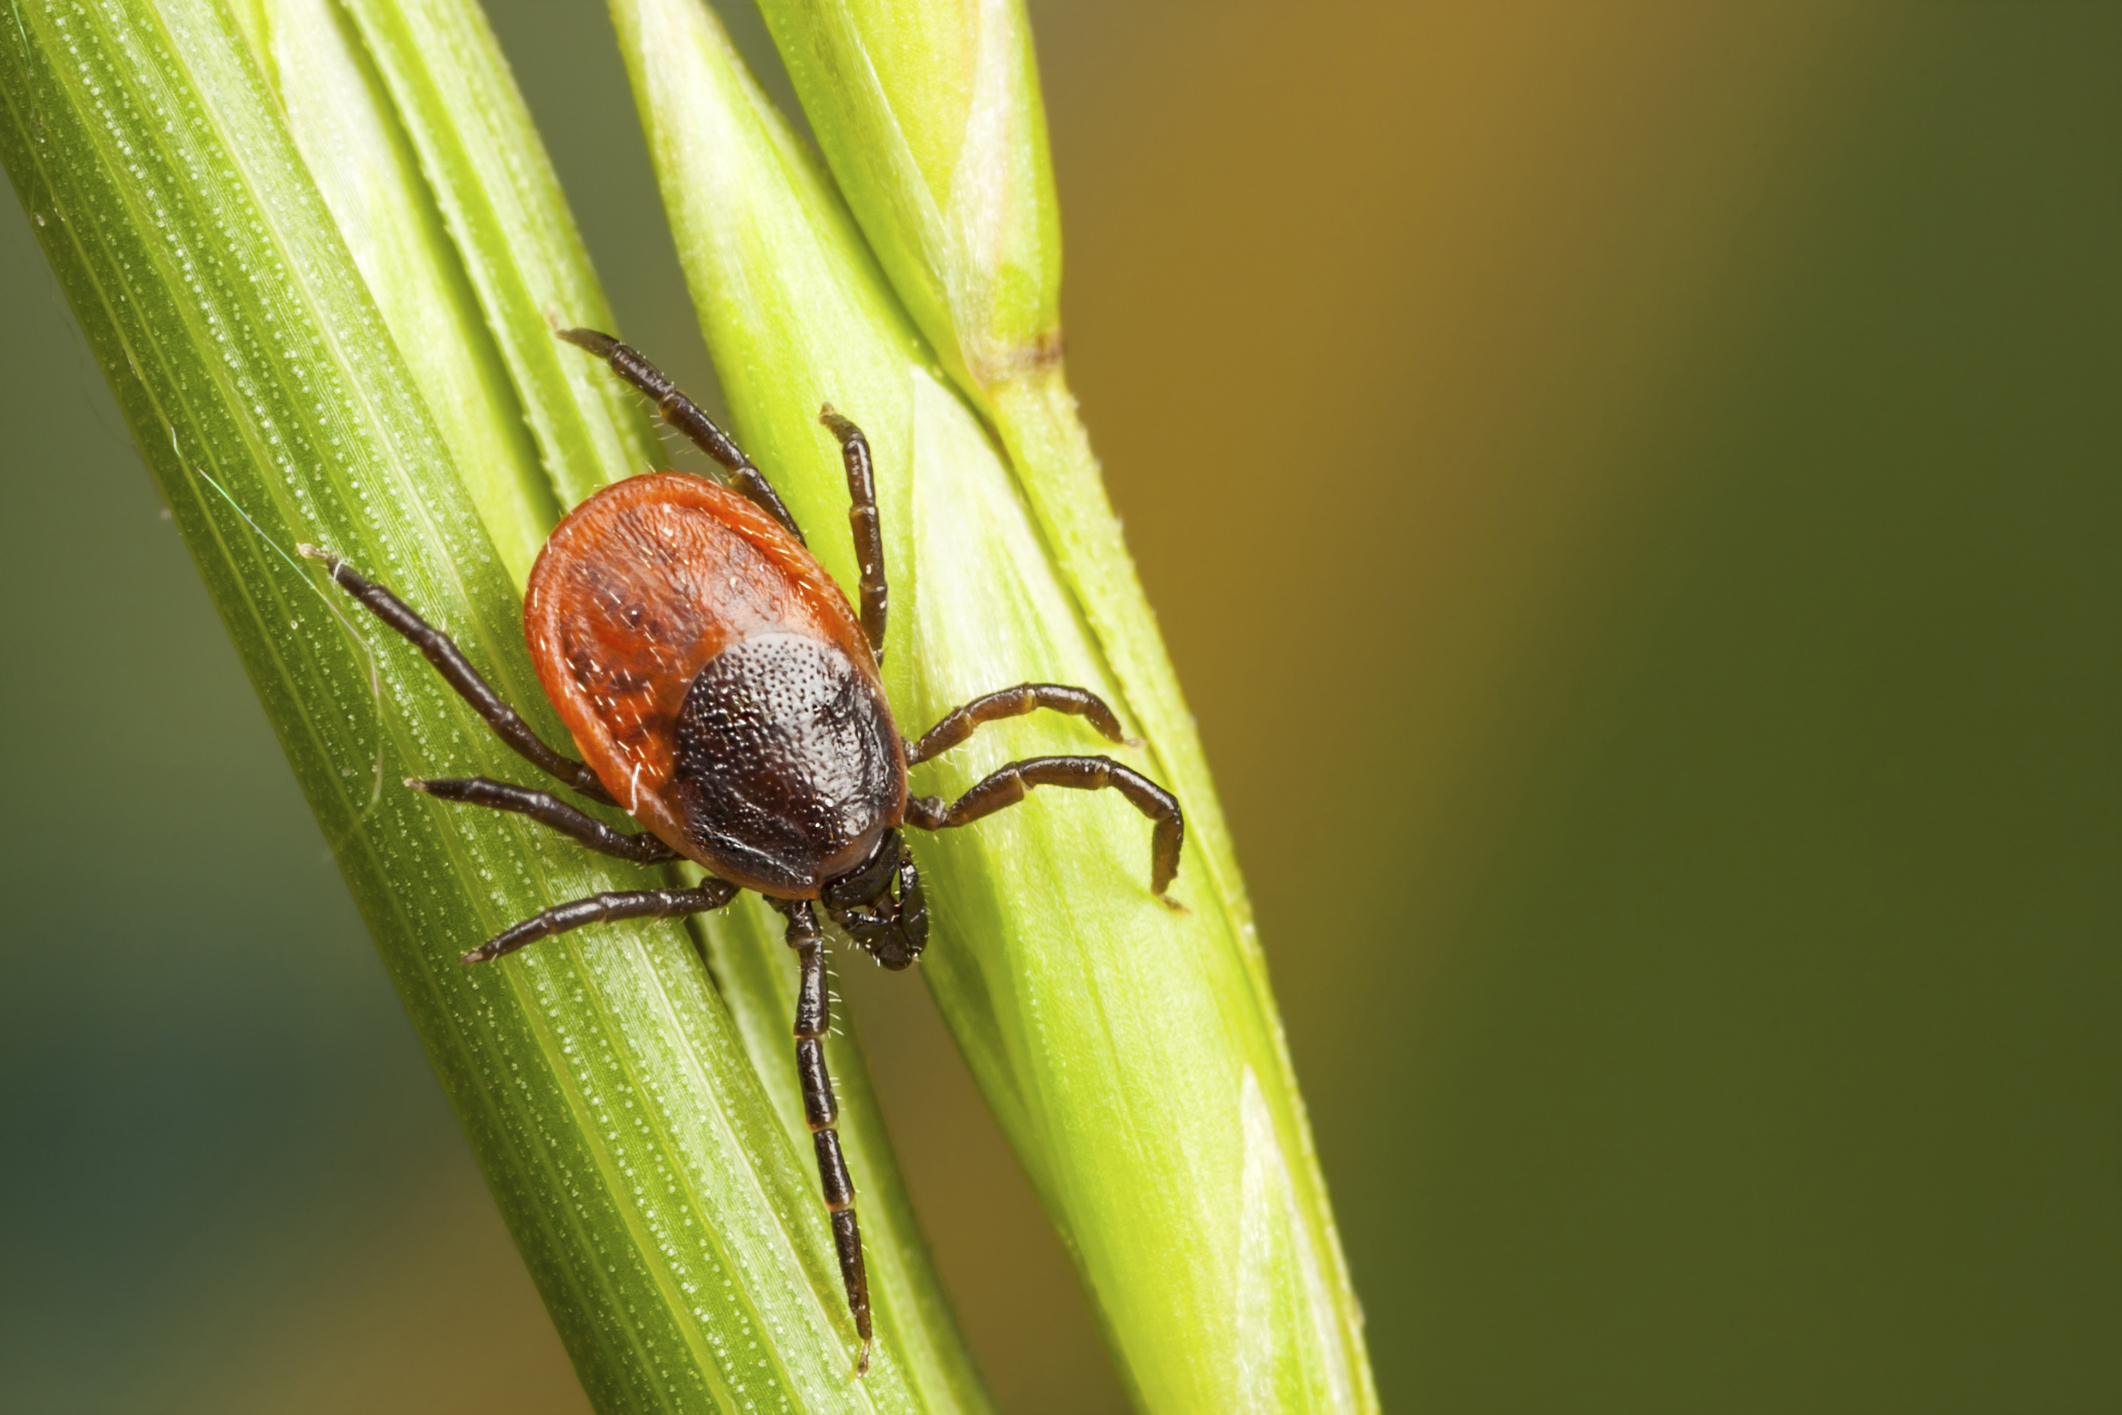 Warm weather means tick season is on the way